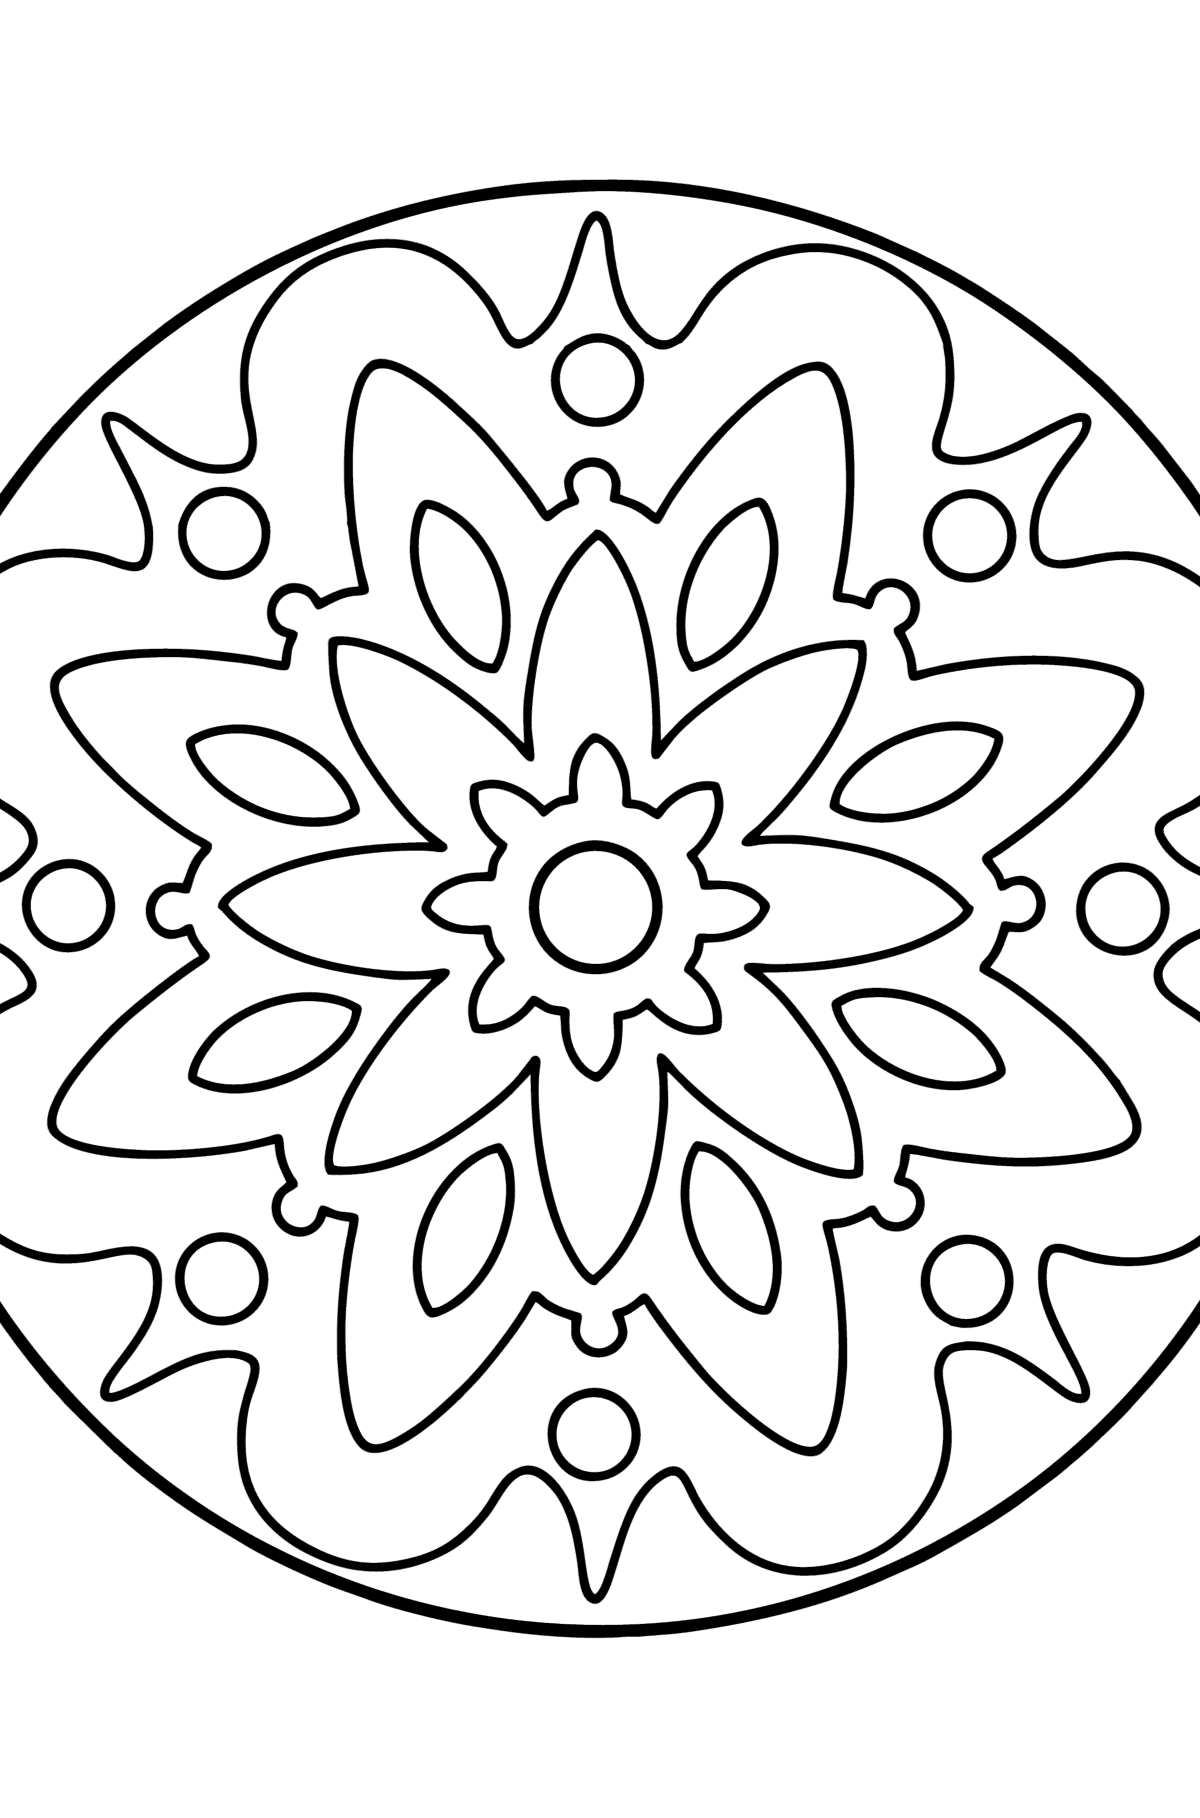 Mandala coloring page - 22 elements - Coloring Pages for Kids